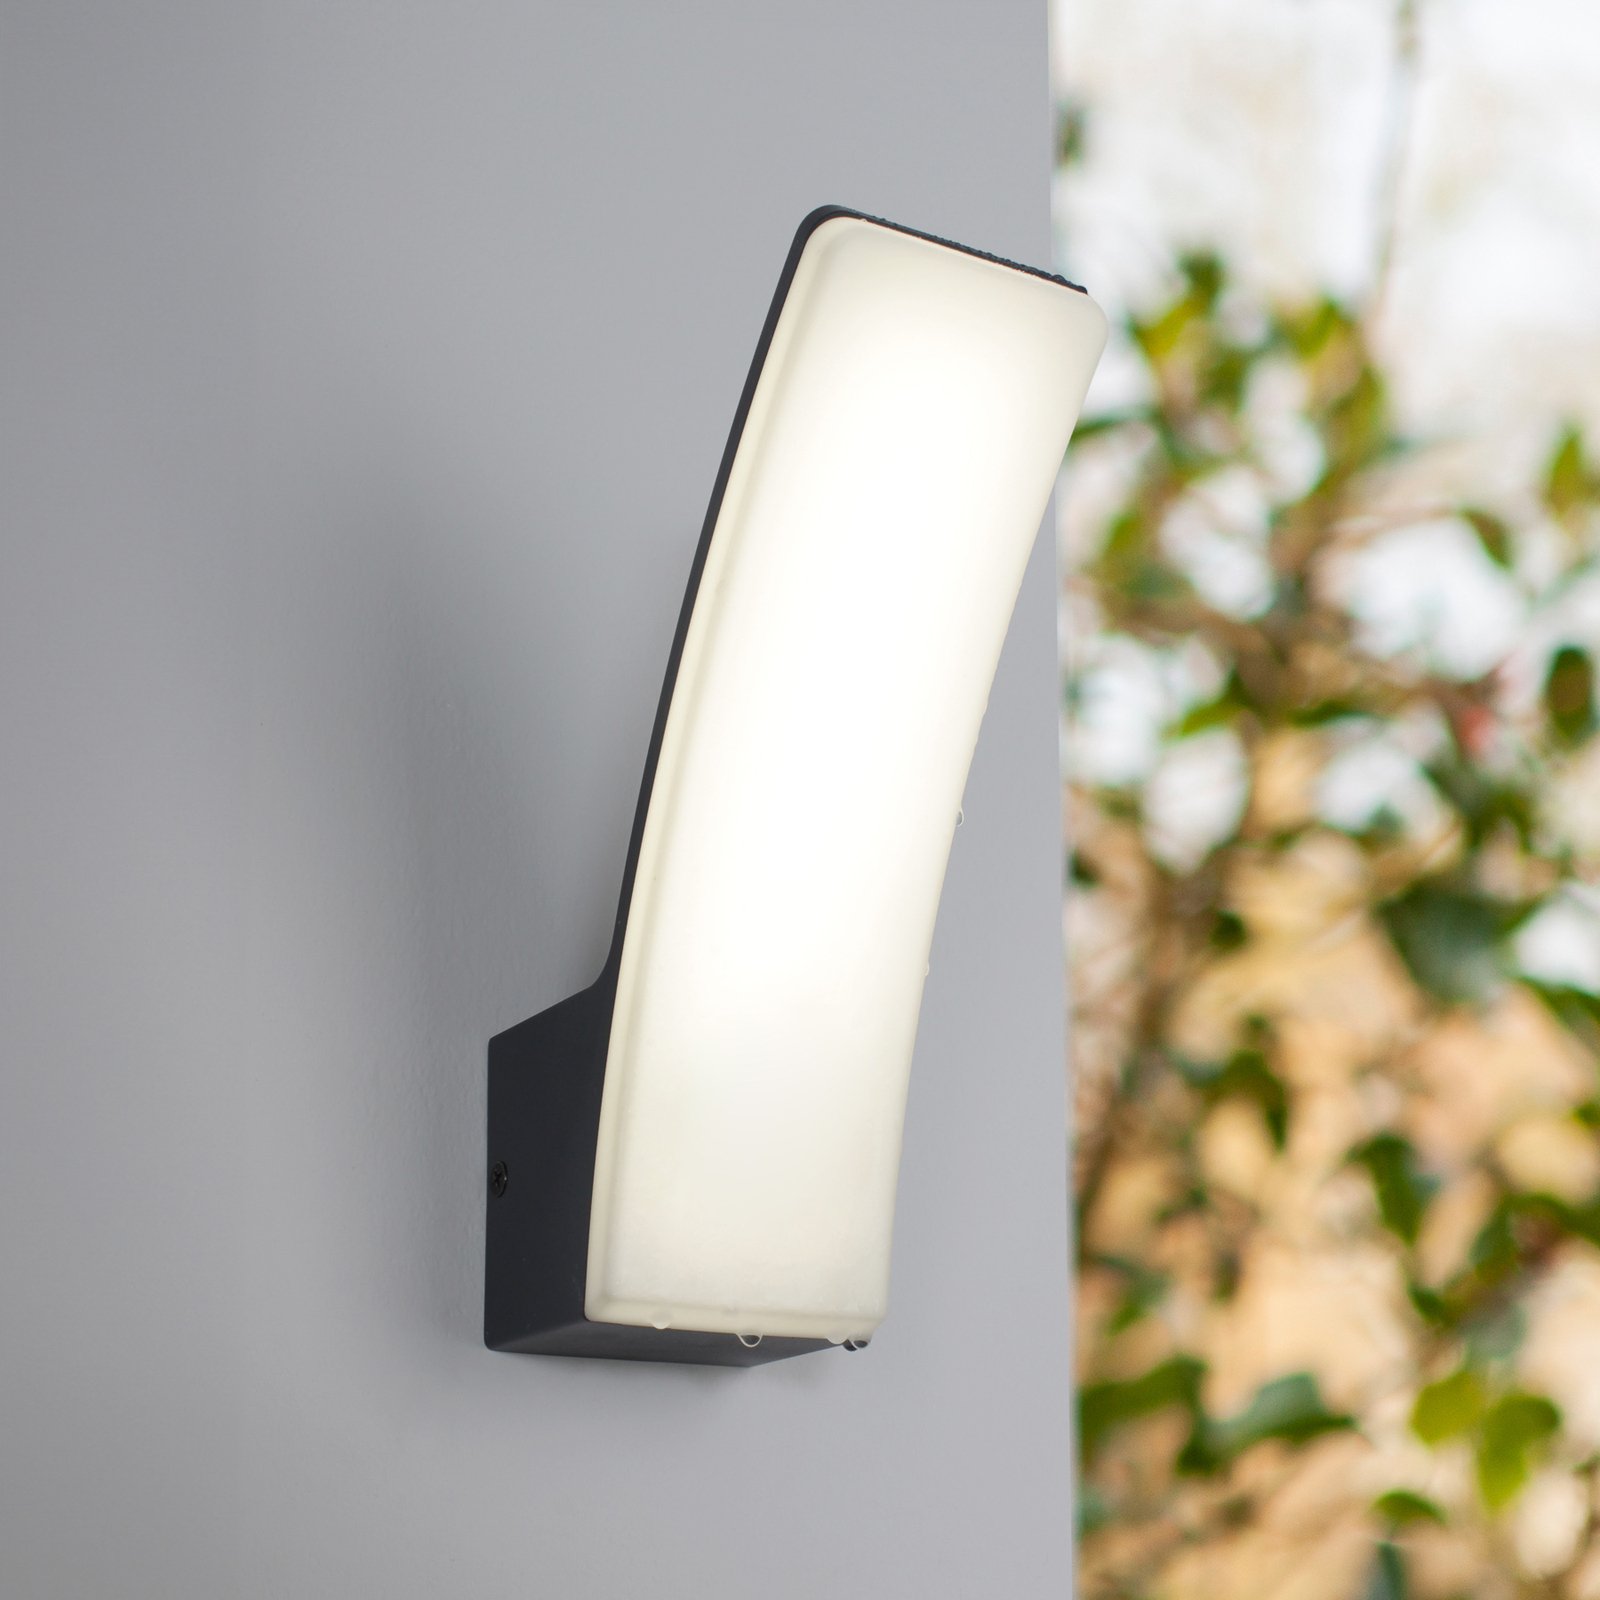 LED outdoor wall light Cairo, anthracite, plastic